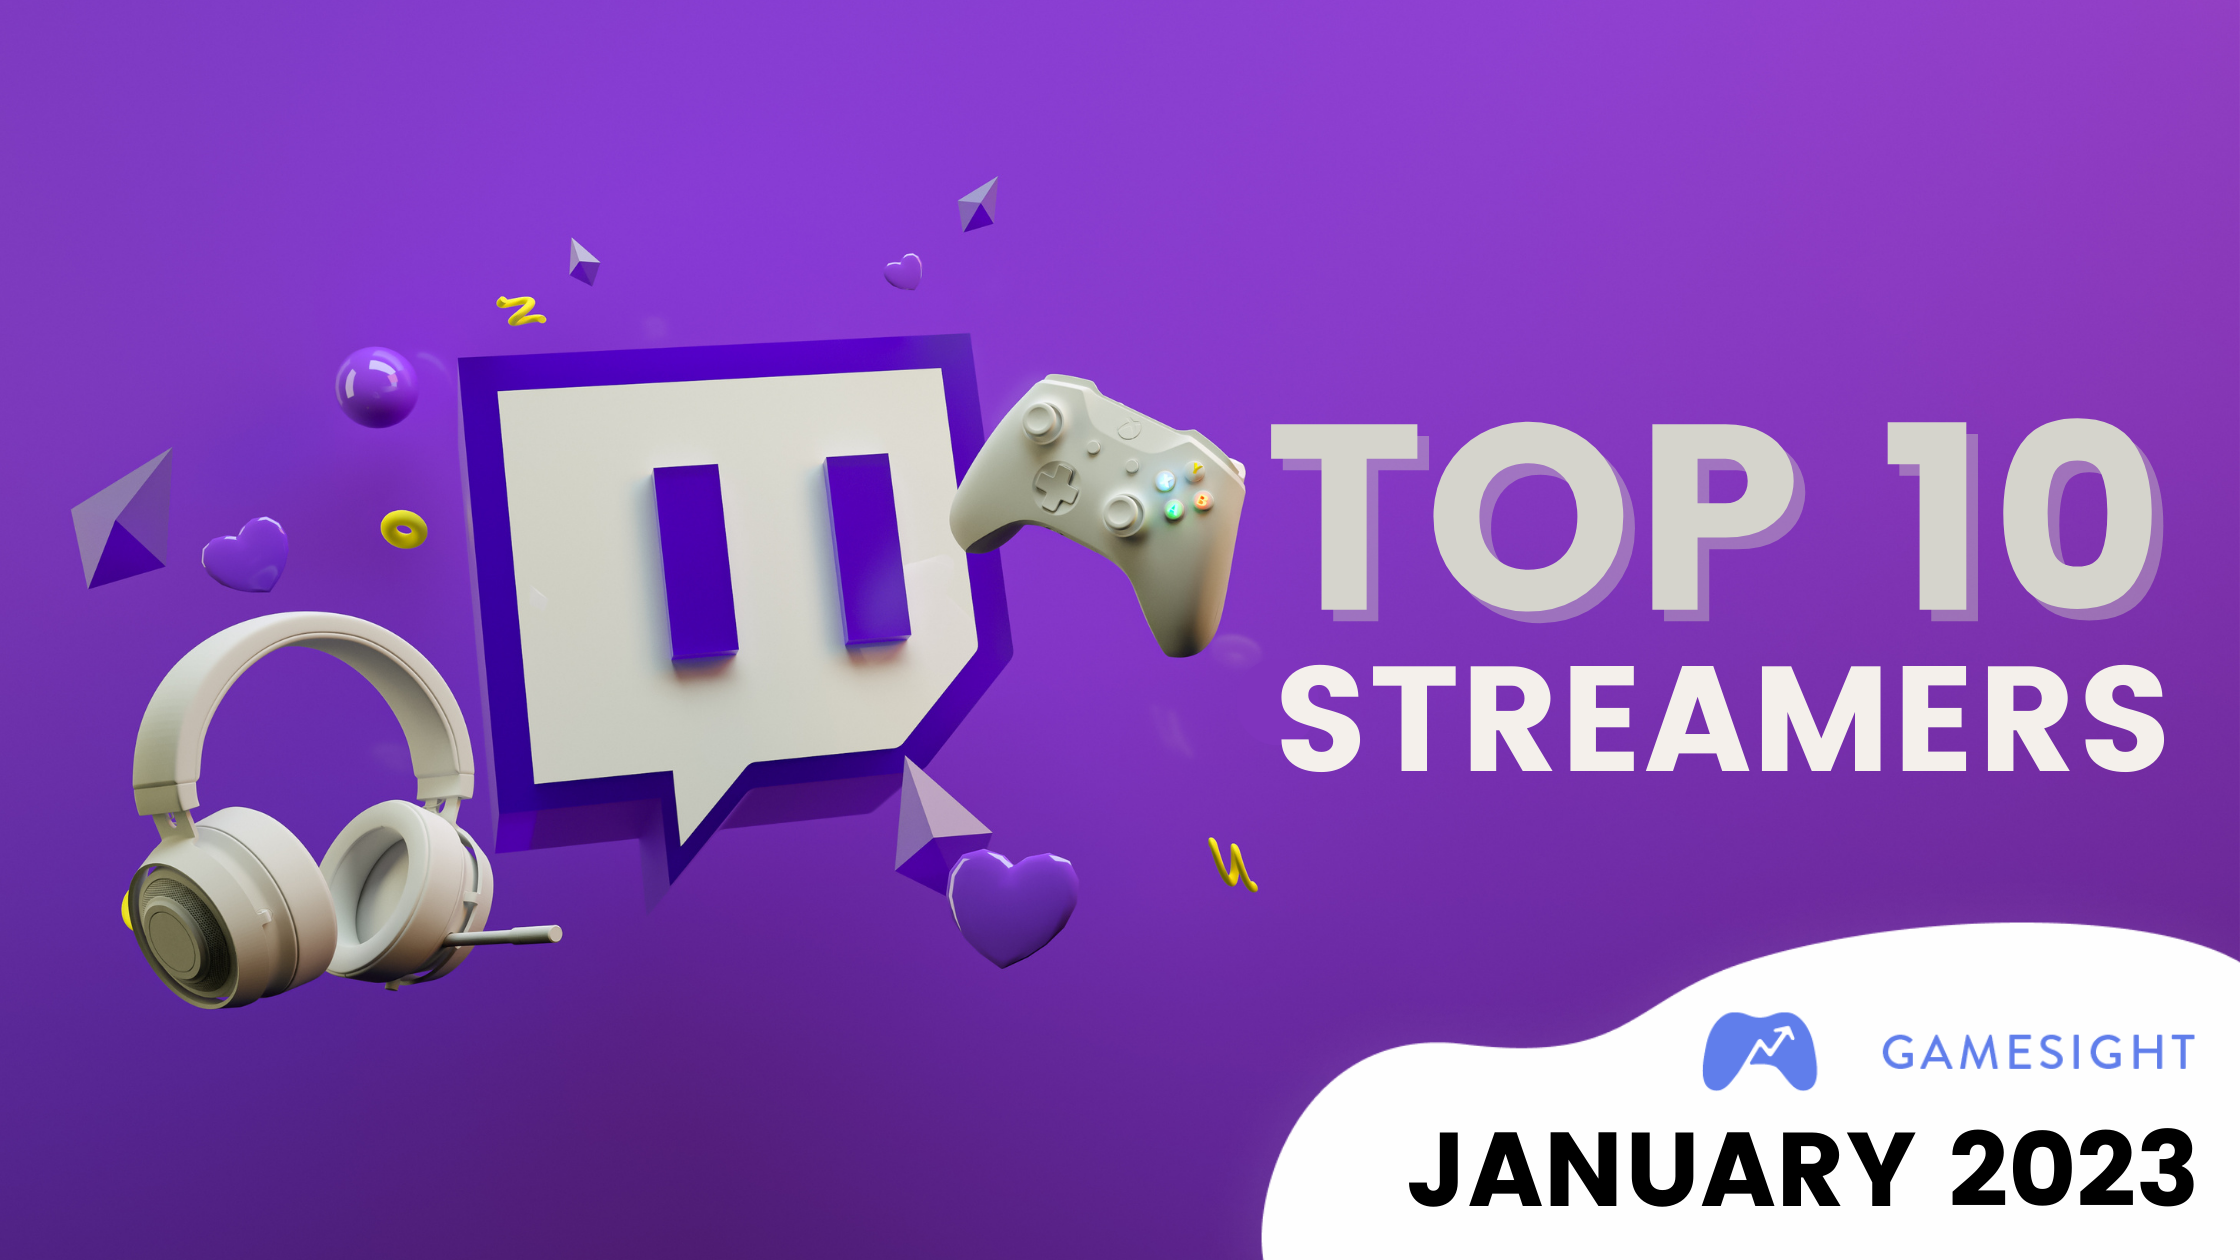 Top 10 Twitch streamers: Most followers, games played